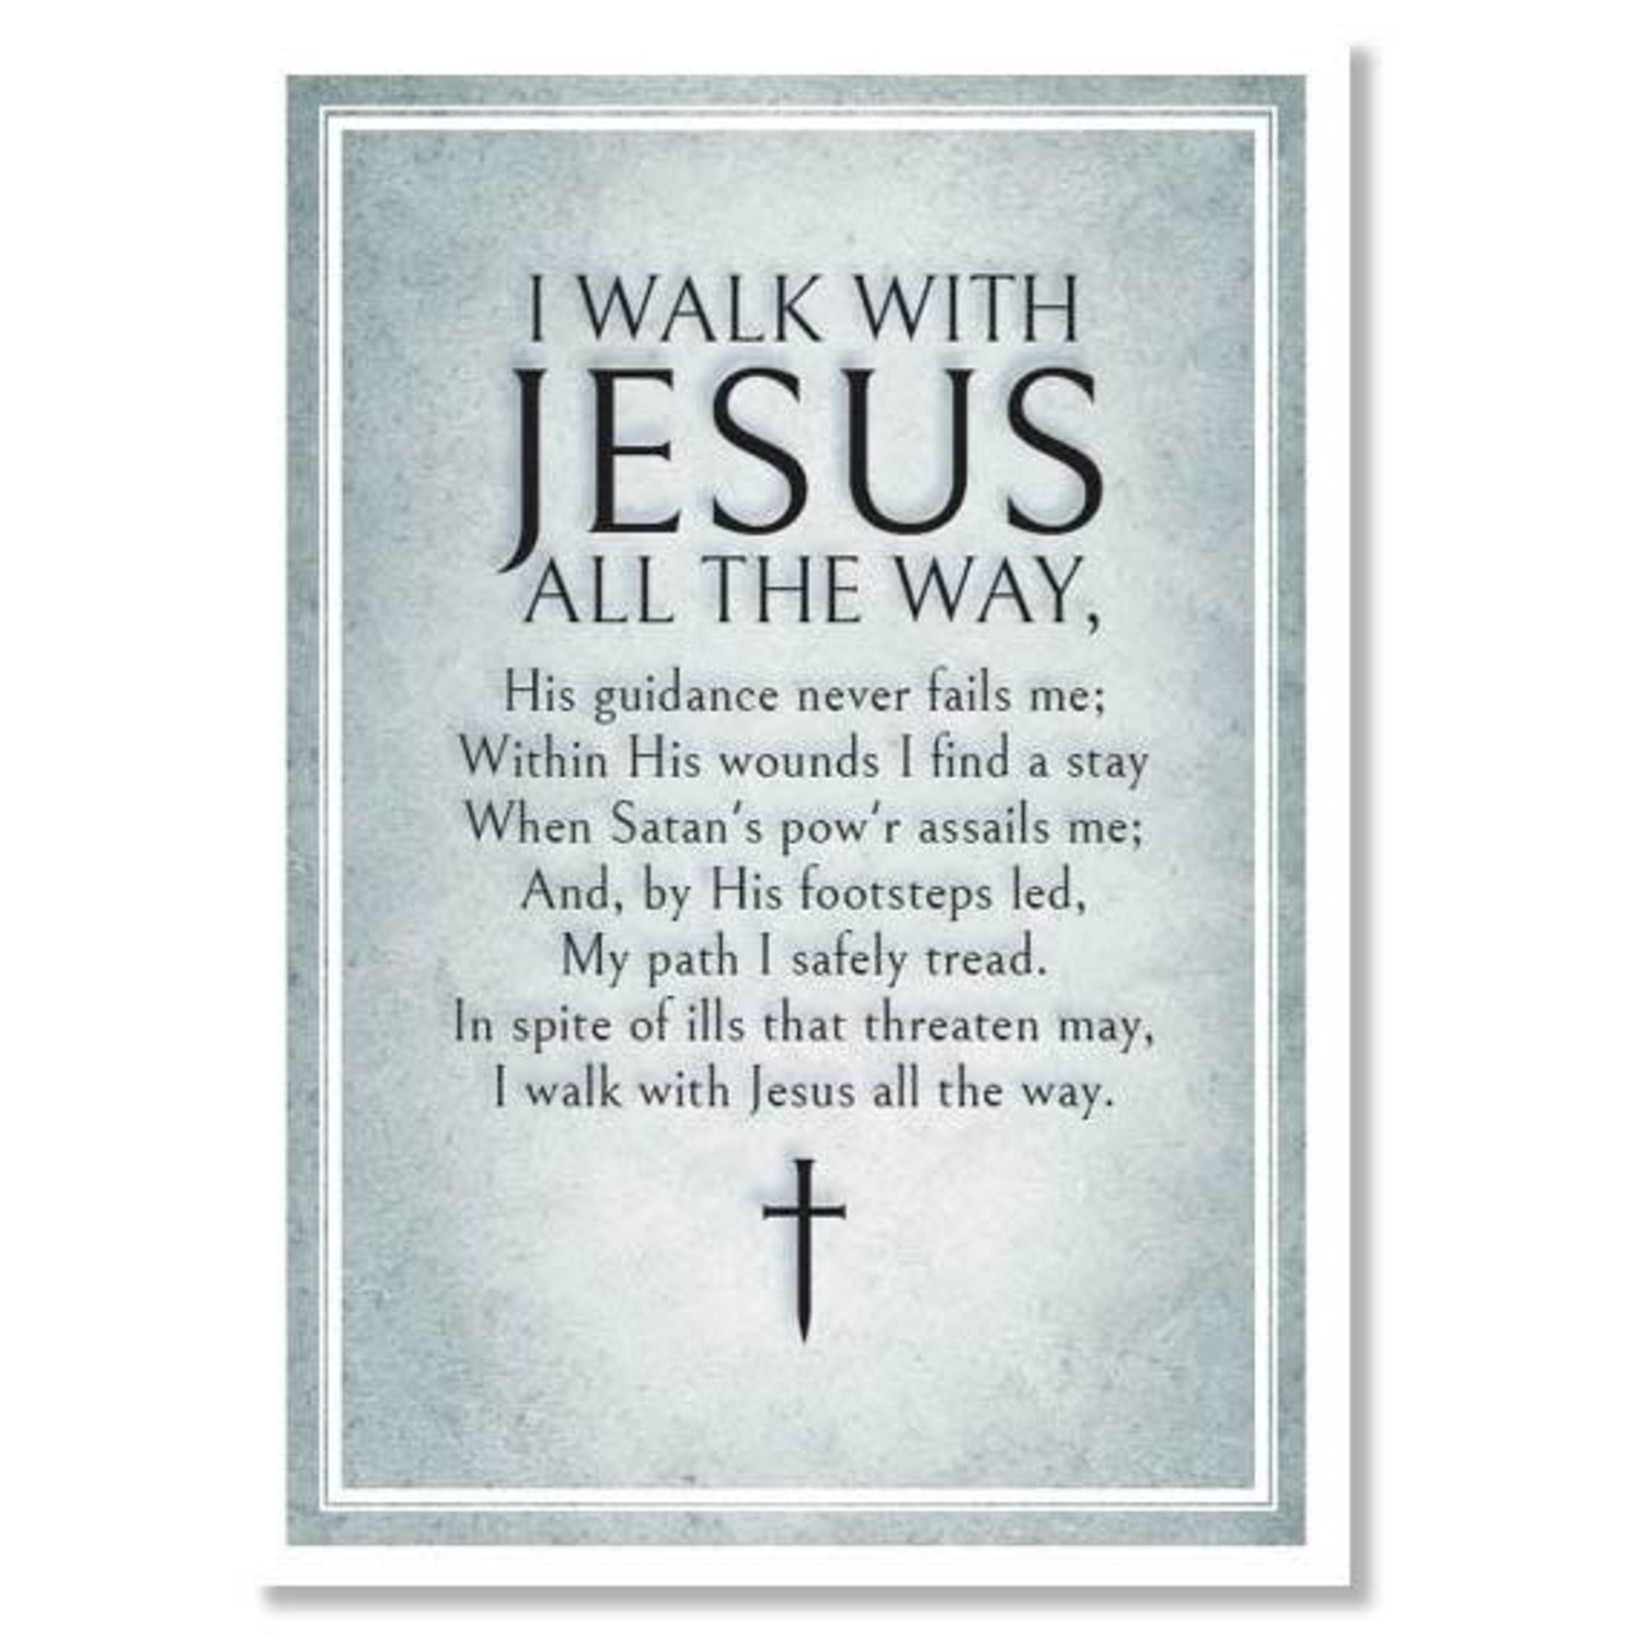 Hymns In My Heart Hymns In My Heart - 5x7" Greeting Card - General - I Walk With Jesus